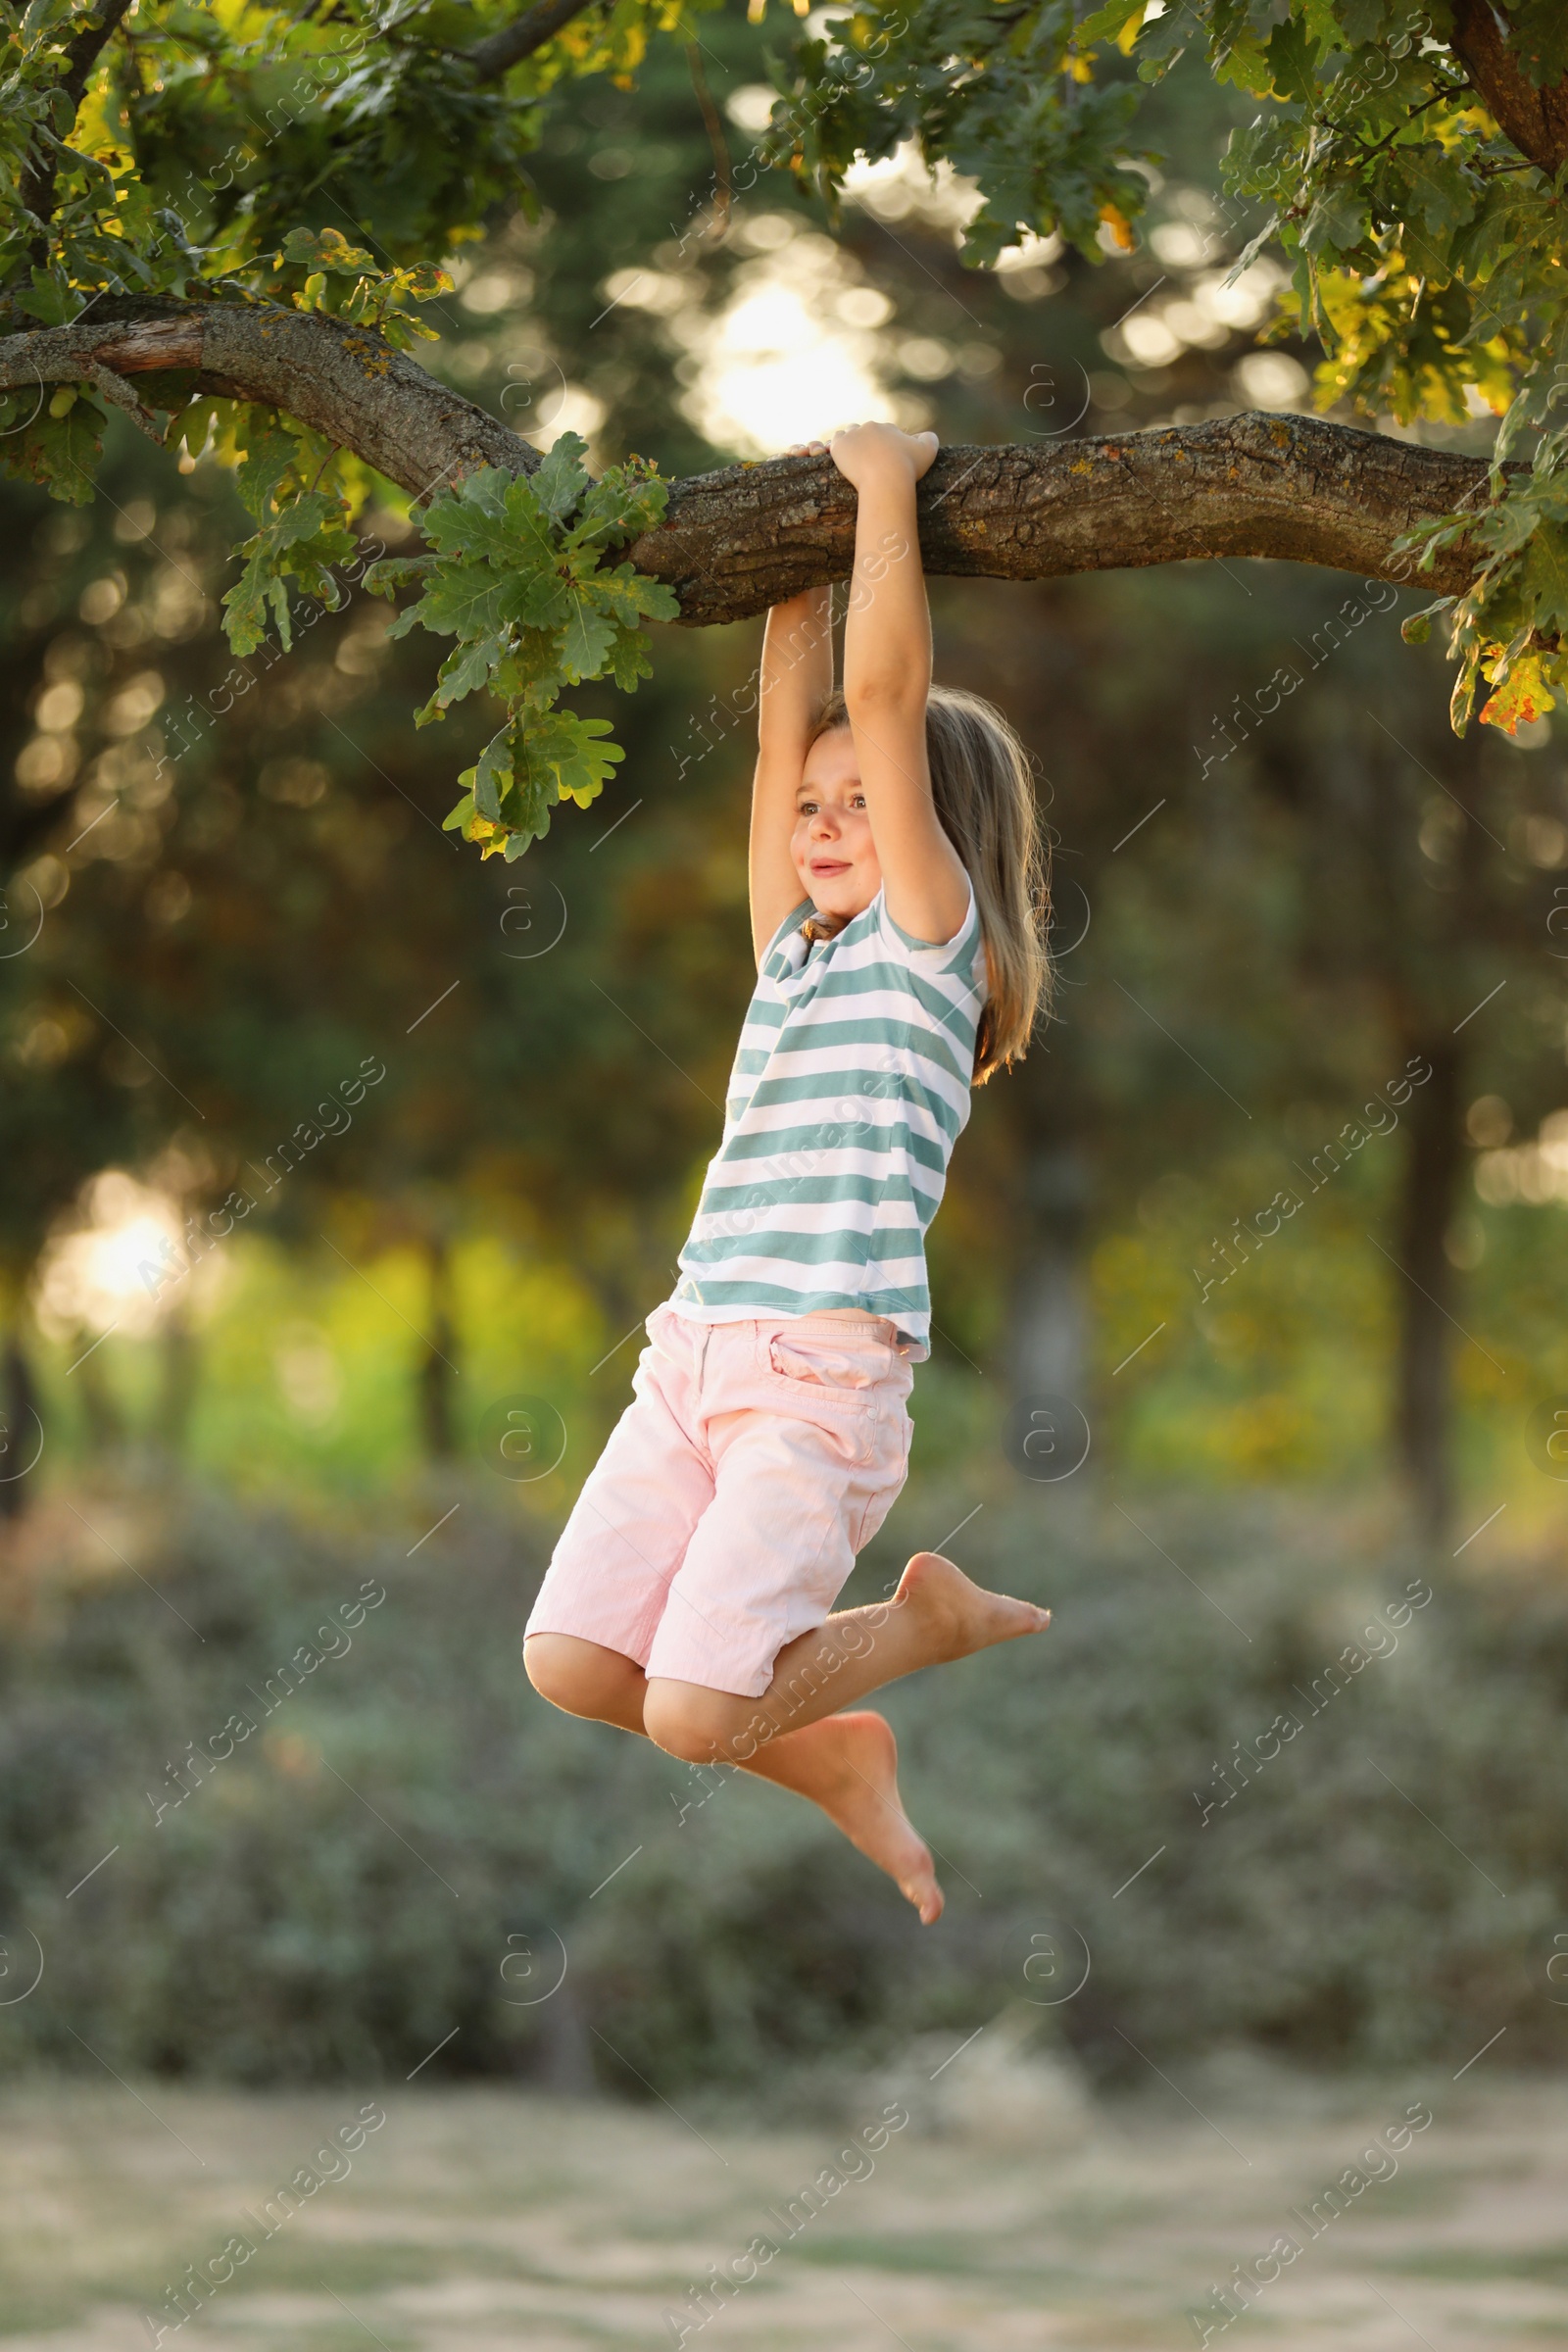 Photo of Cute little girl swinging on tree branch outdoors. Child spending time in nature